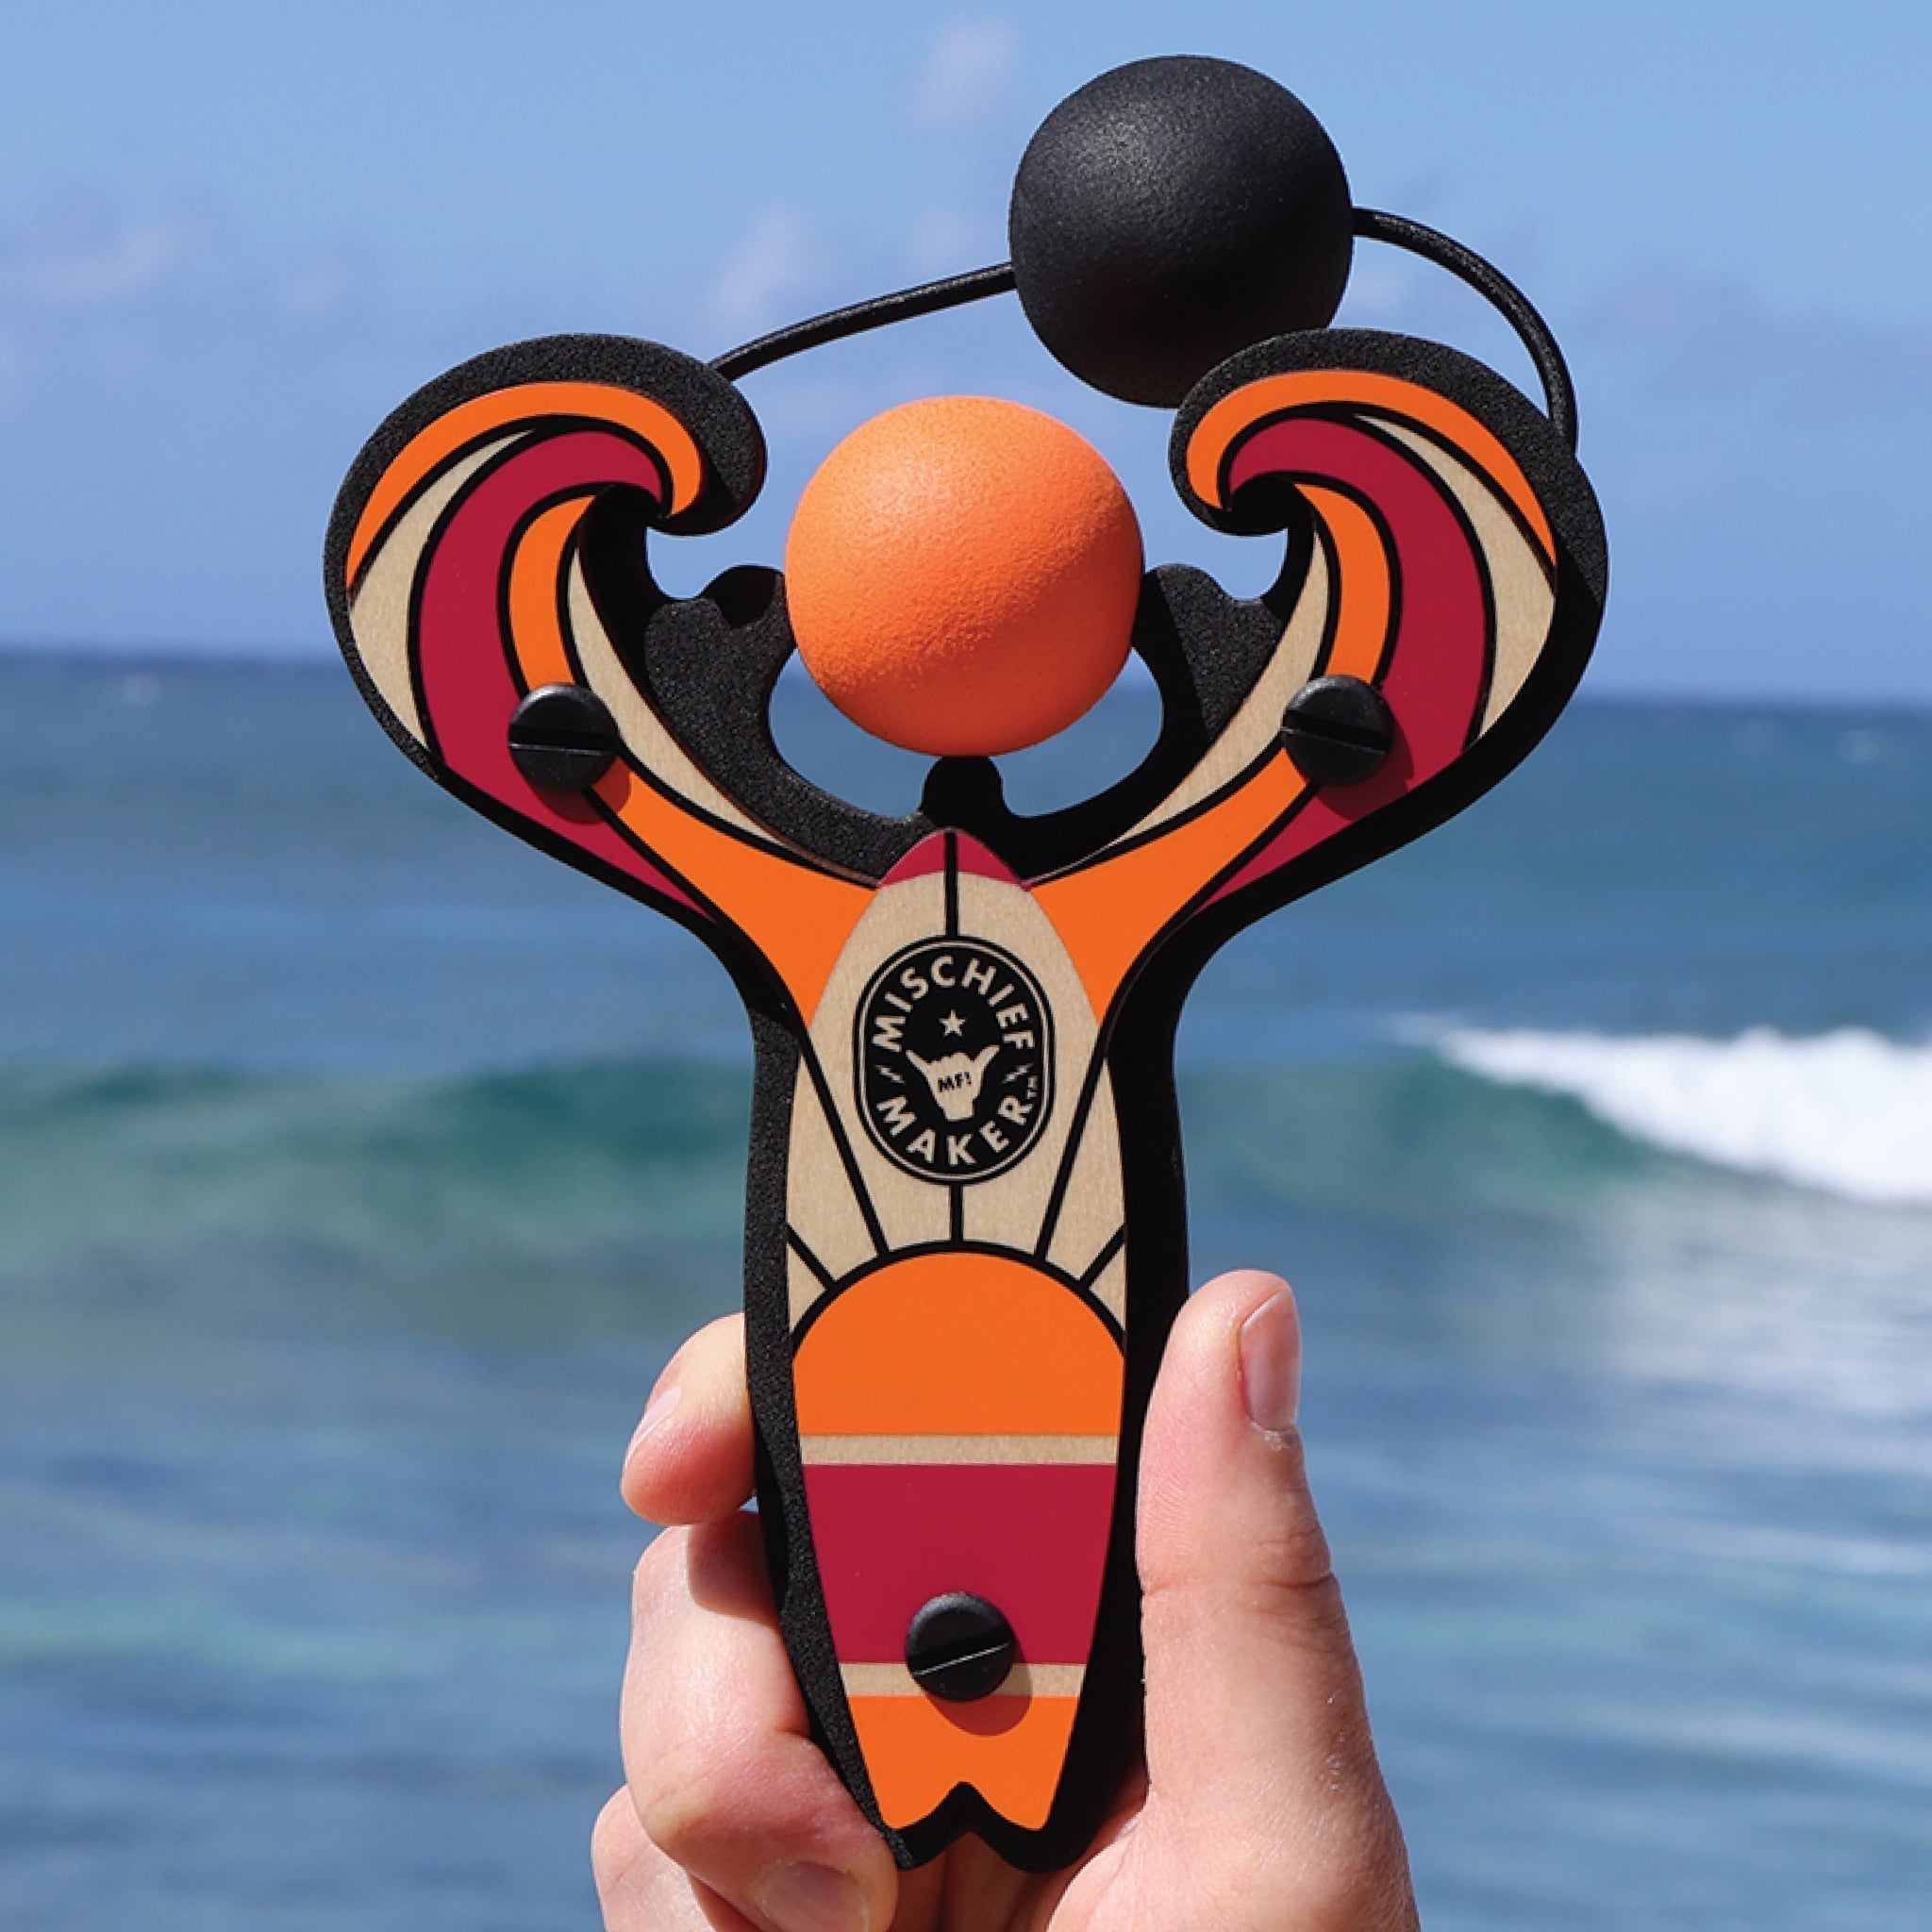 Orange Surf’s Up toy slingshot hand held with ball foam ball by the ocean. Mischief Maker by Mighty Fun!